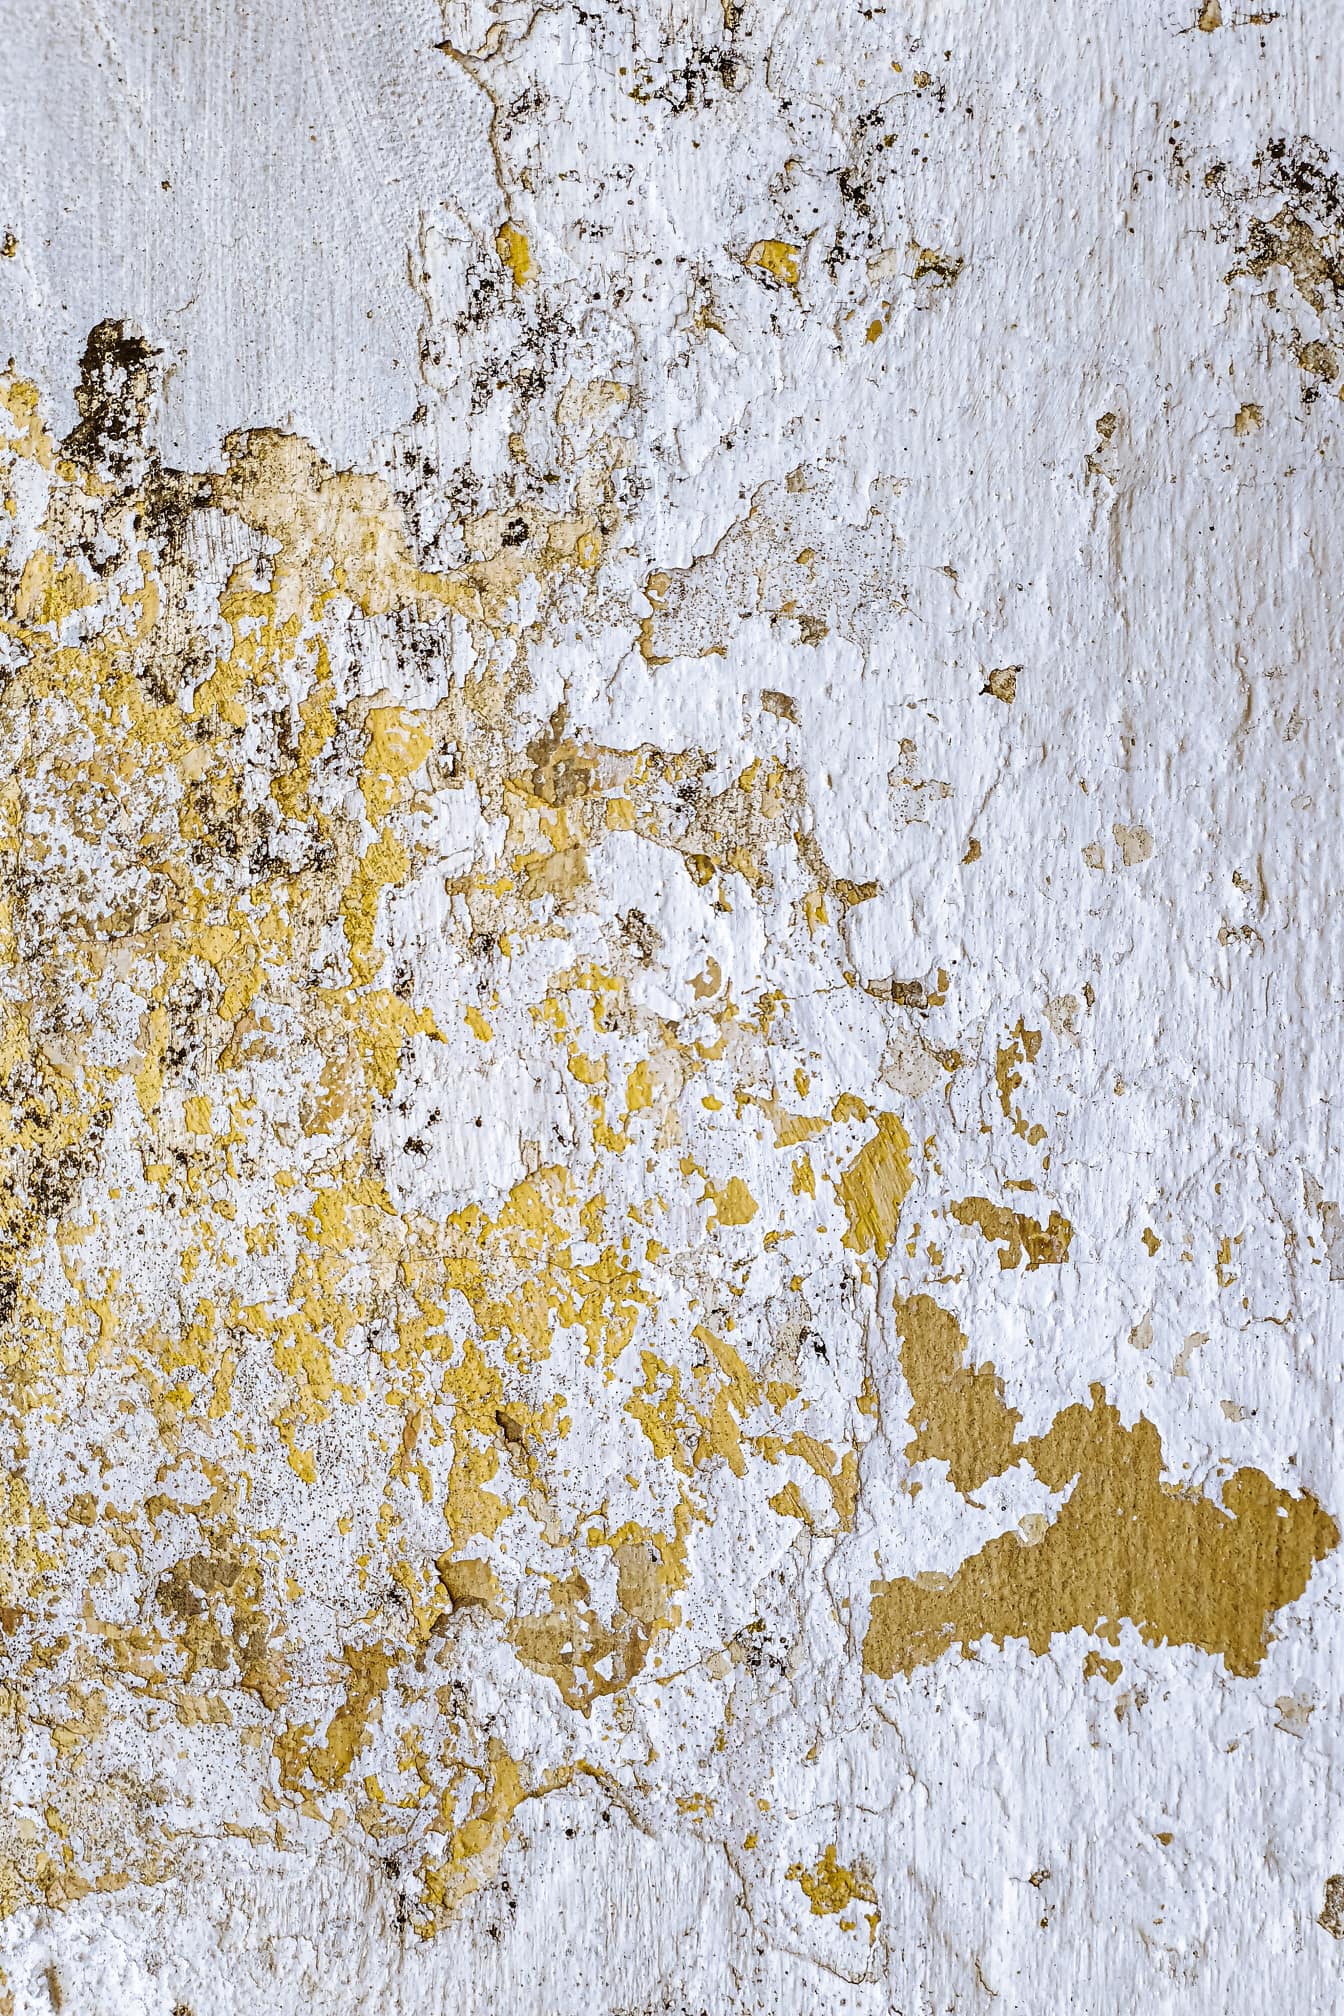 Dirty wall texture with light brown old paint